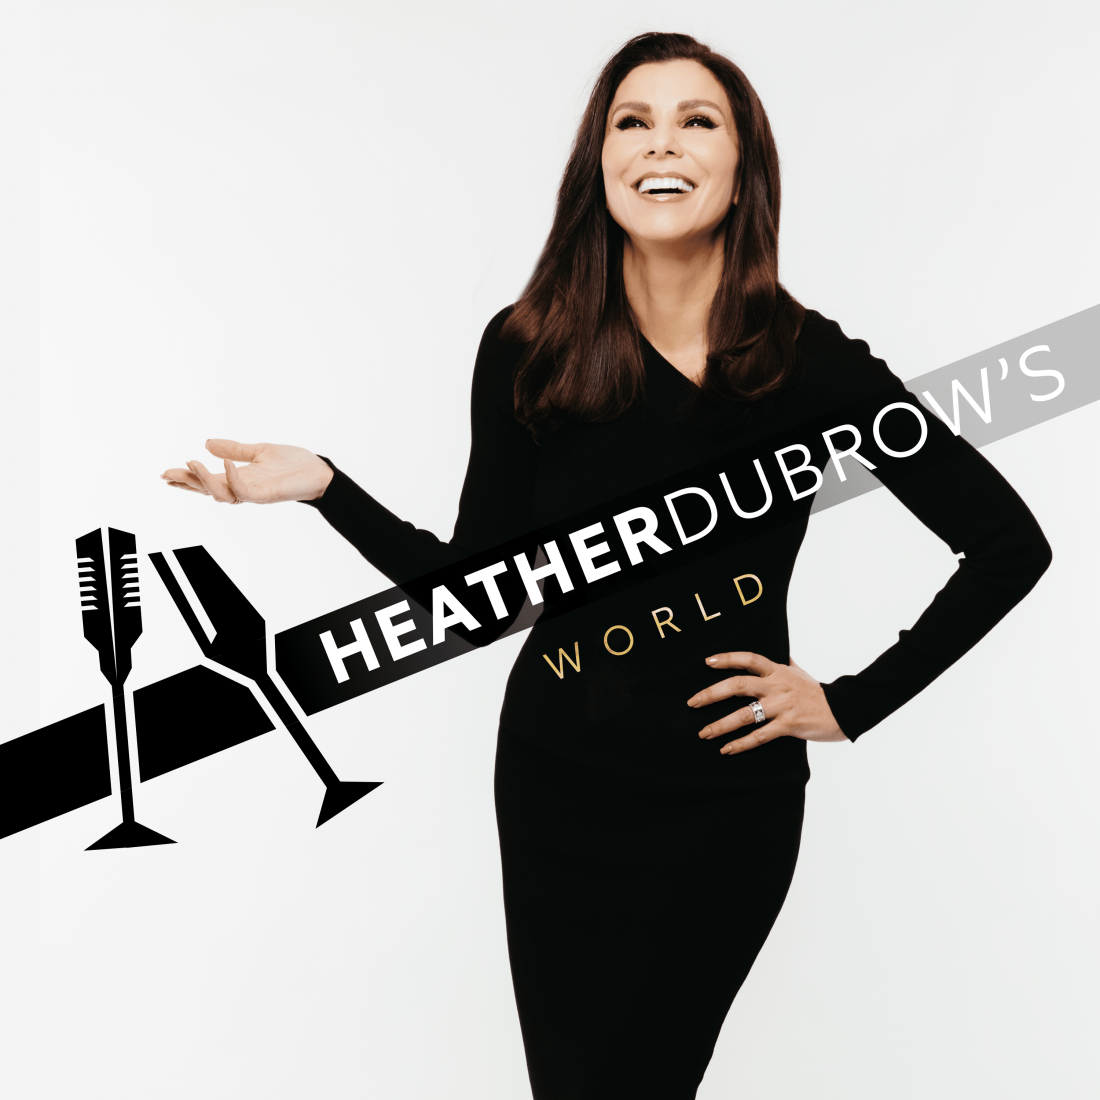 Heather Dubrow's World promotional image